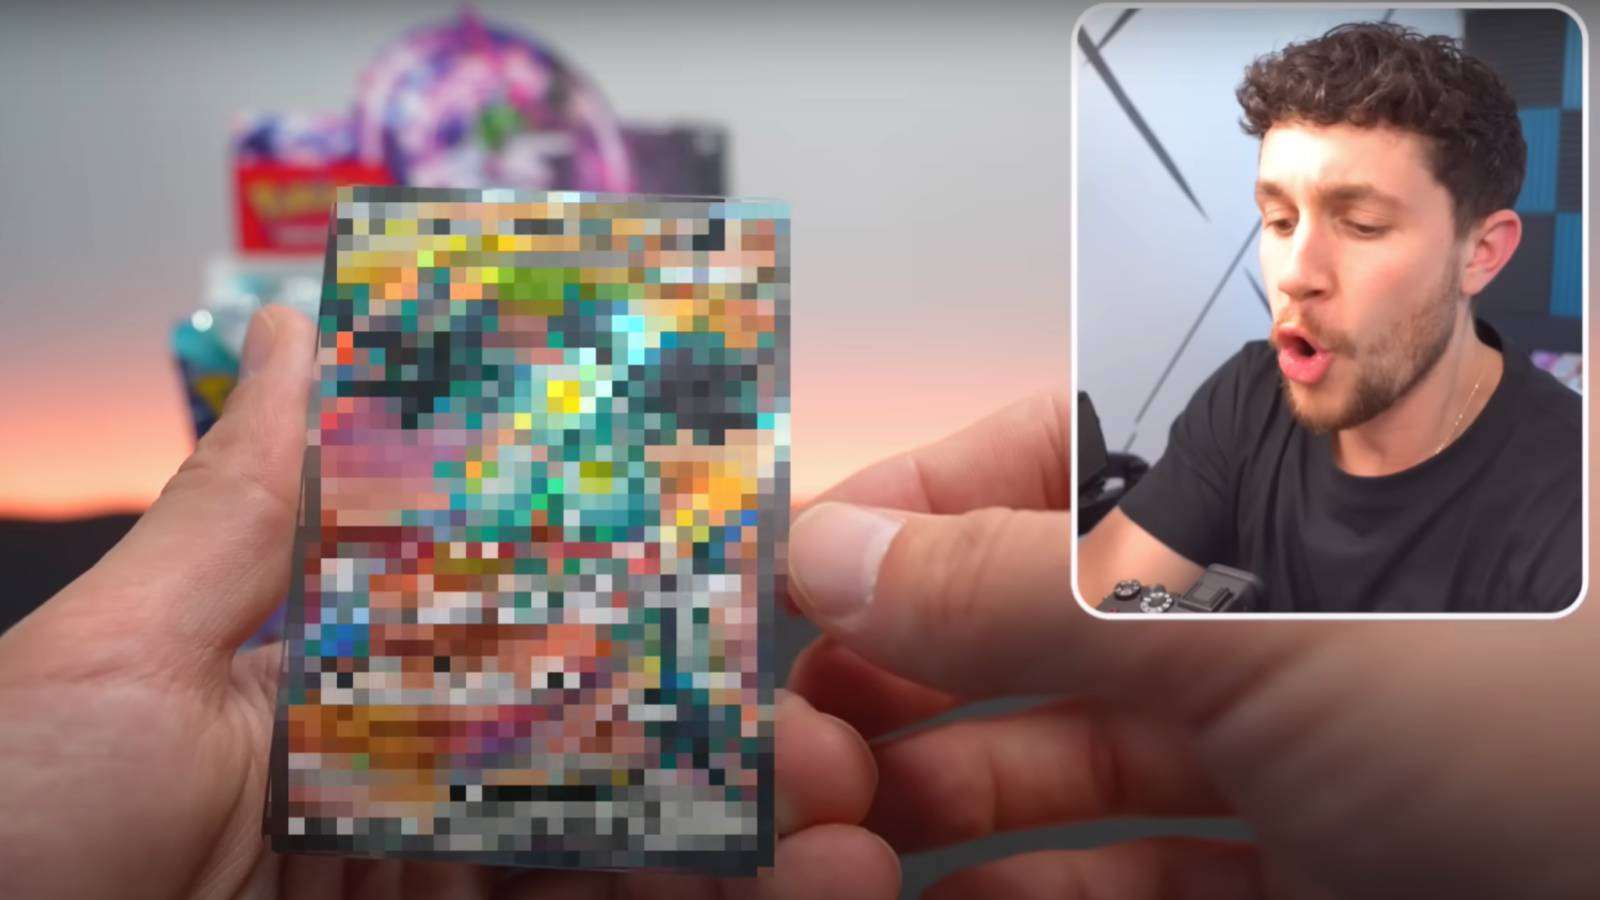 A screenshot from a YouTube video shows a white male creator opening pokemon card packs, with their reaction and face in the top right, and a blurred image of a pokemon card in the foreground